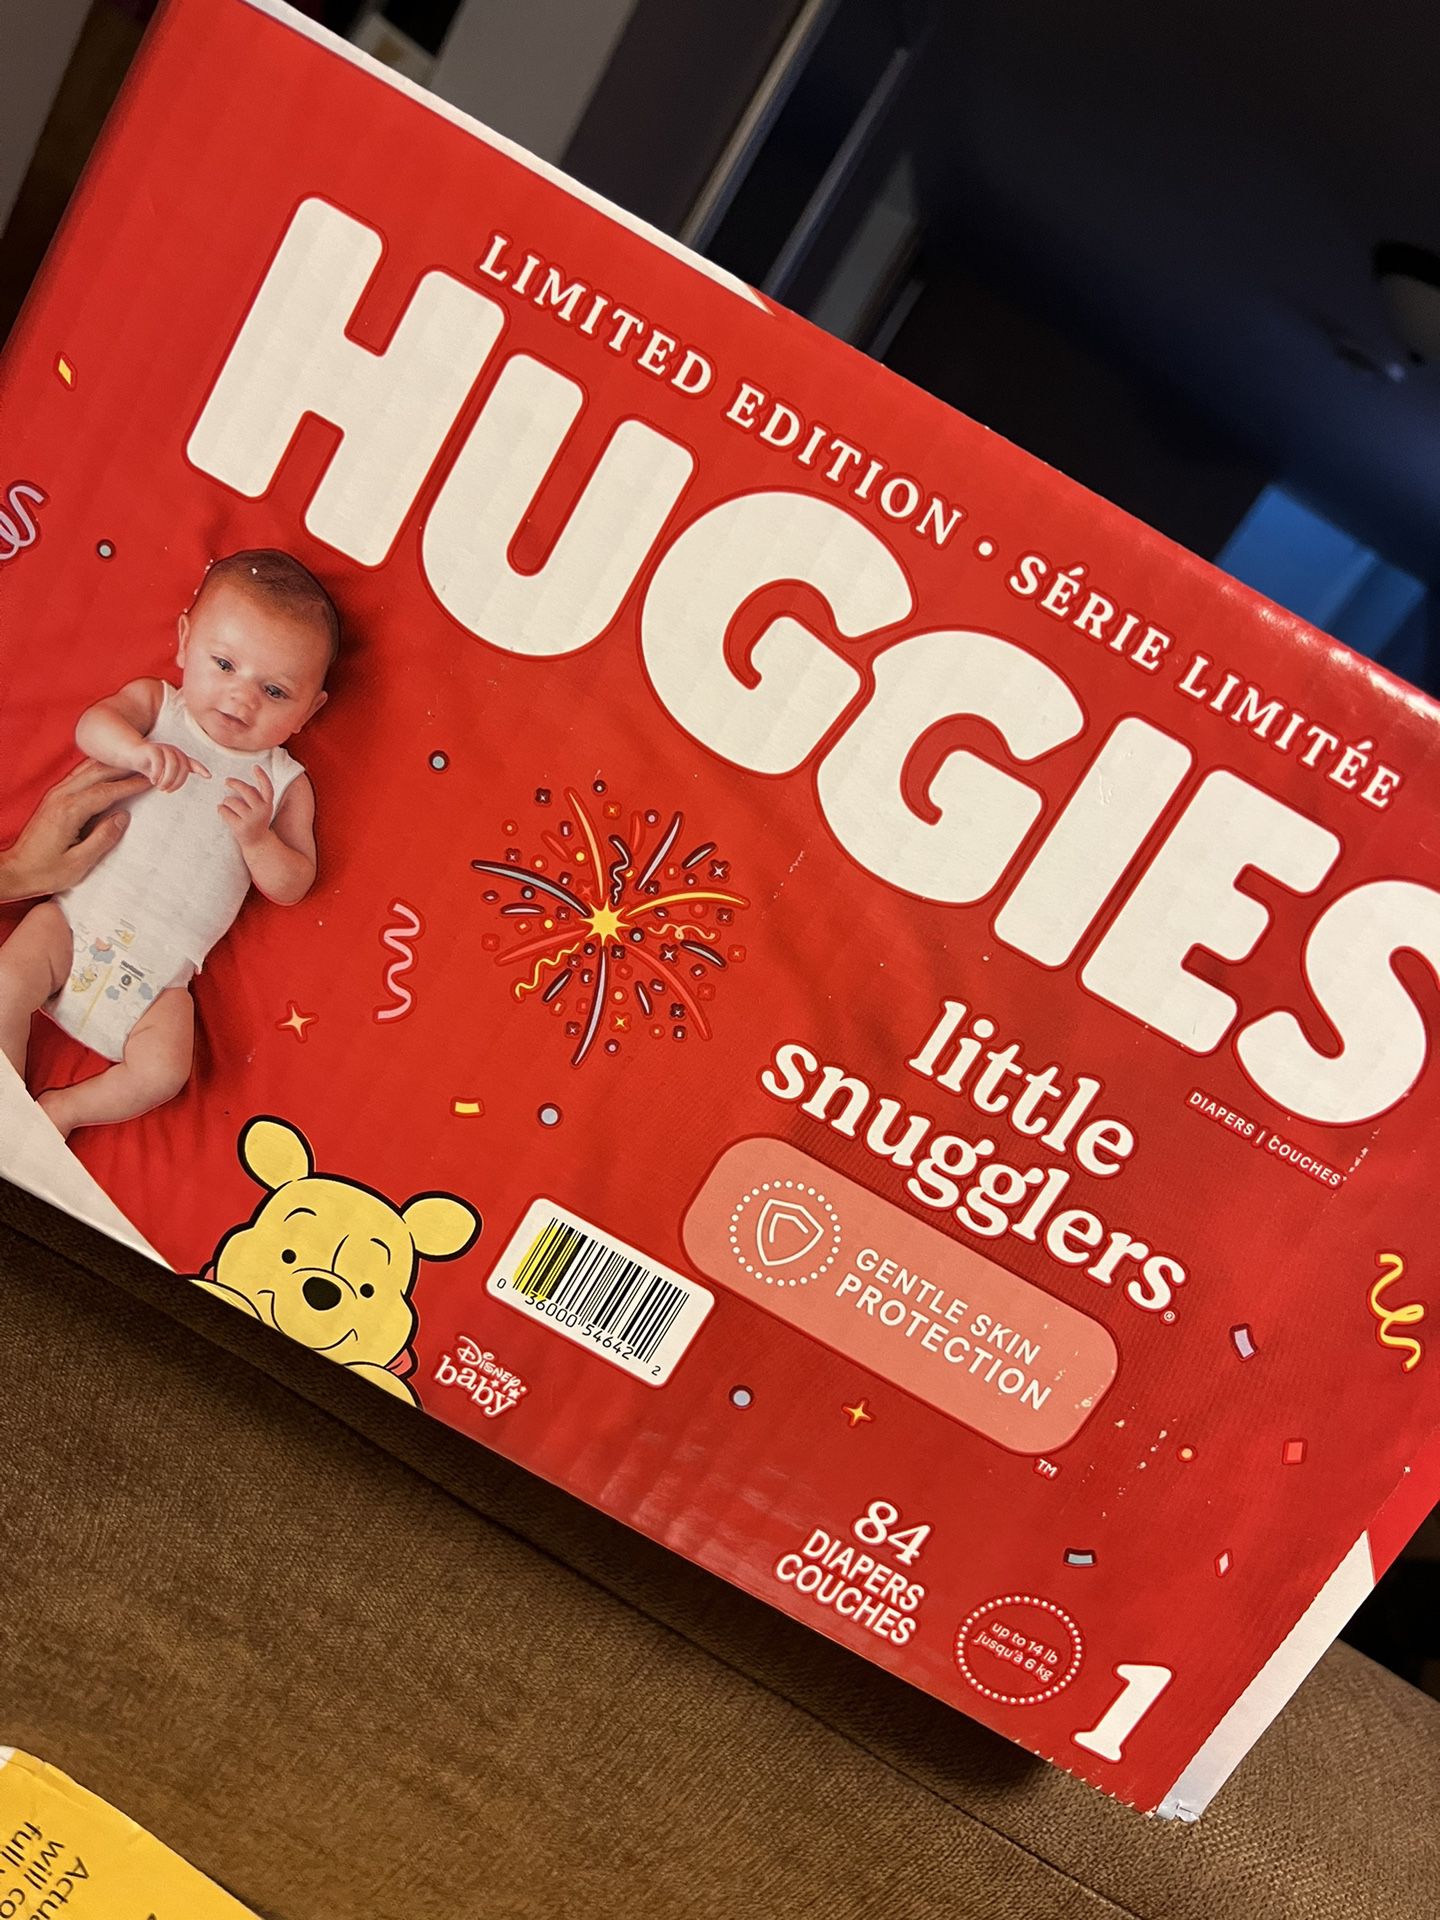 Huggies Little Snugglers 84 Diapers Size 1